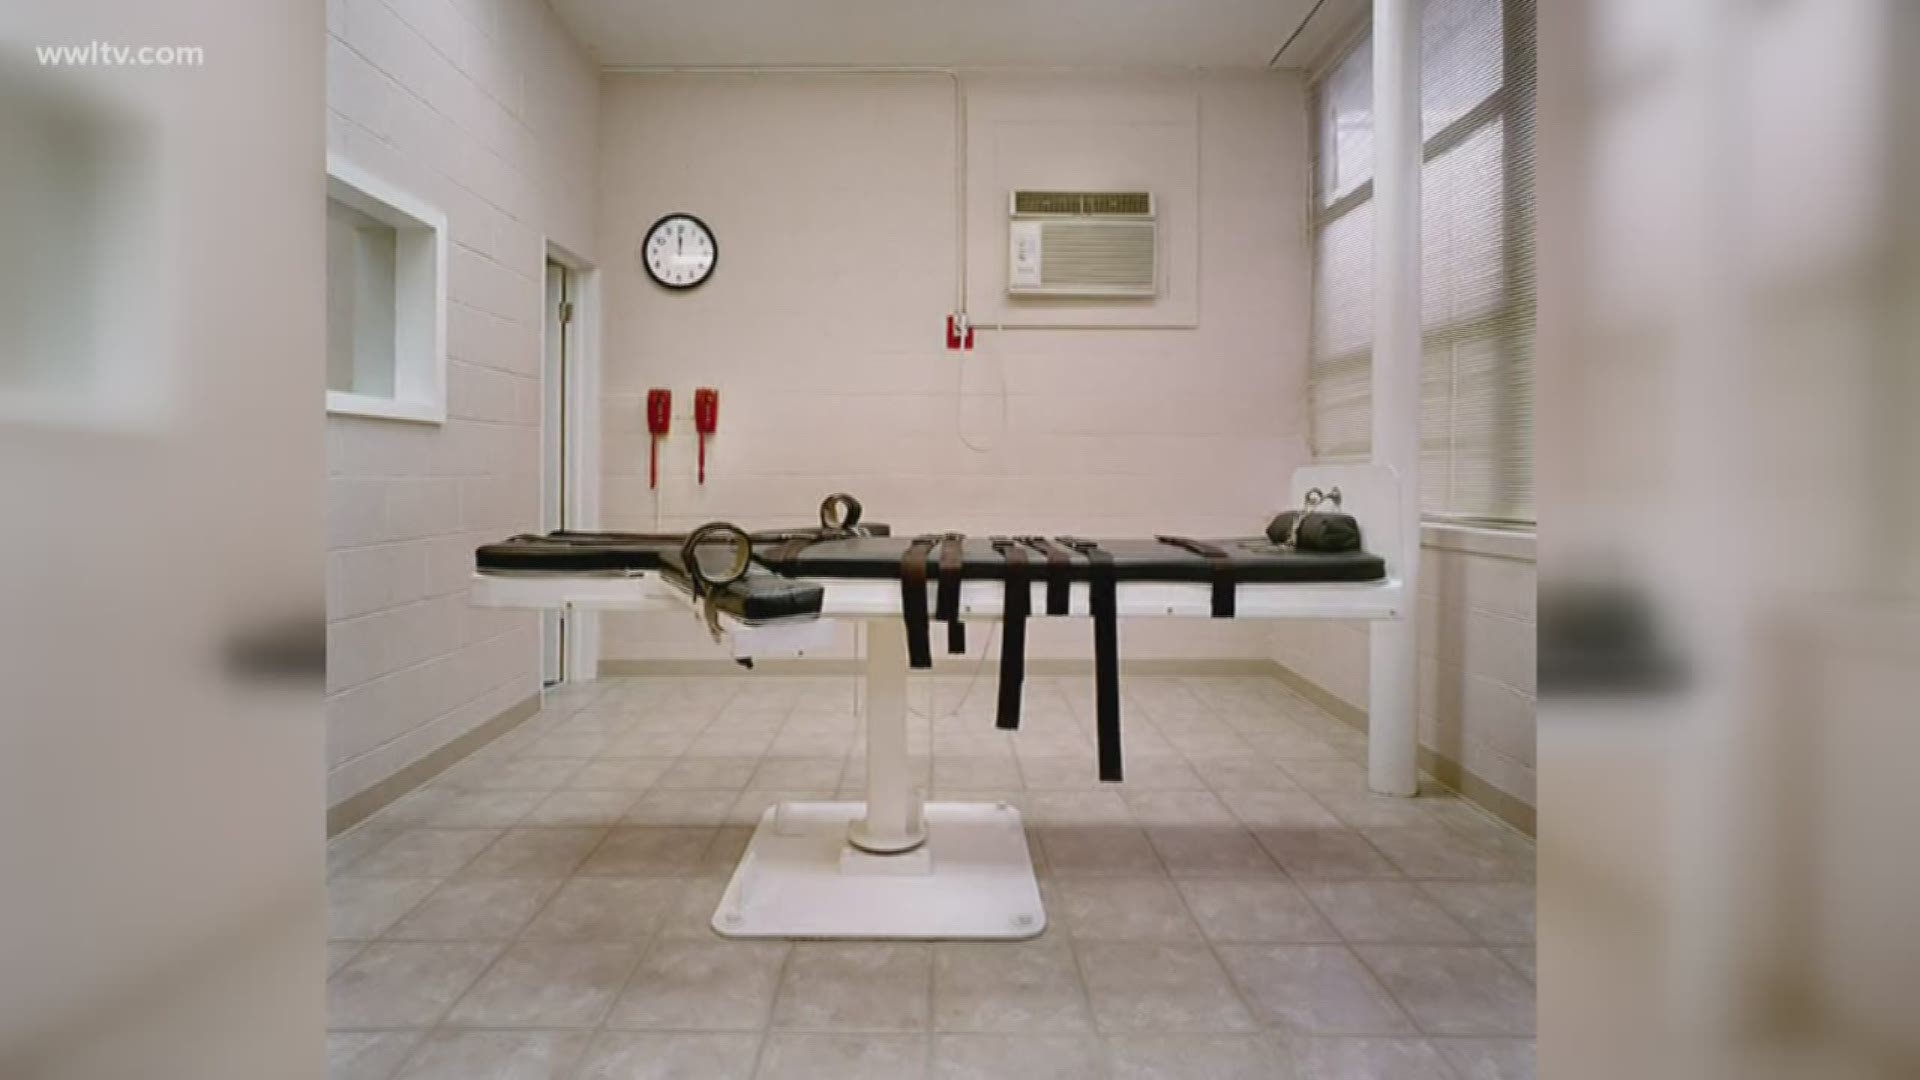 The state hasn't carried out an execution since 2010, in part due to difficulties in getting the drugs considered humane for lethal injections.